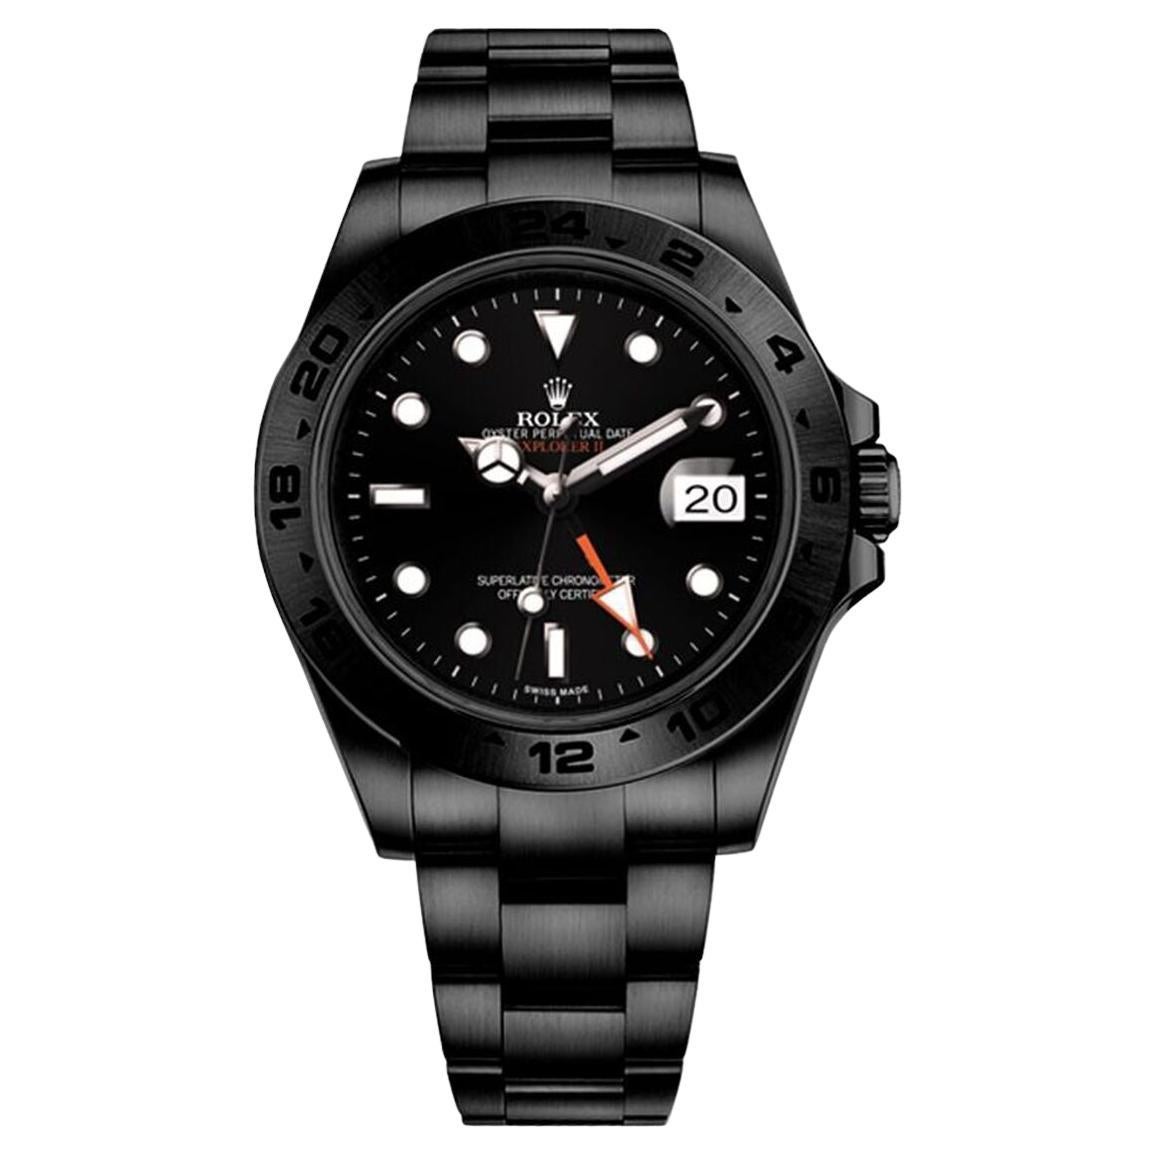 Rolex Explorer II Black PVD/DLC Coated Stainless Steel Watch 216570 For Sale